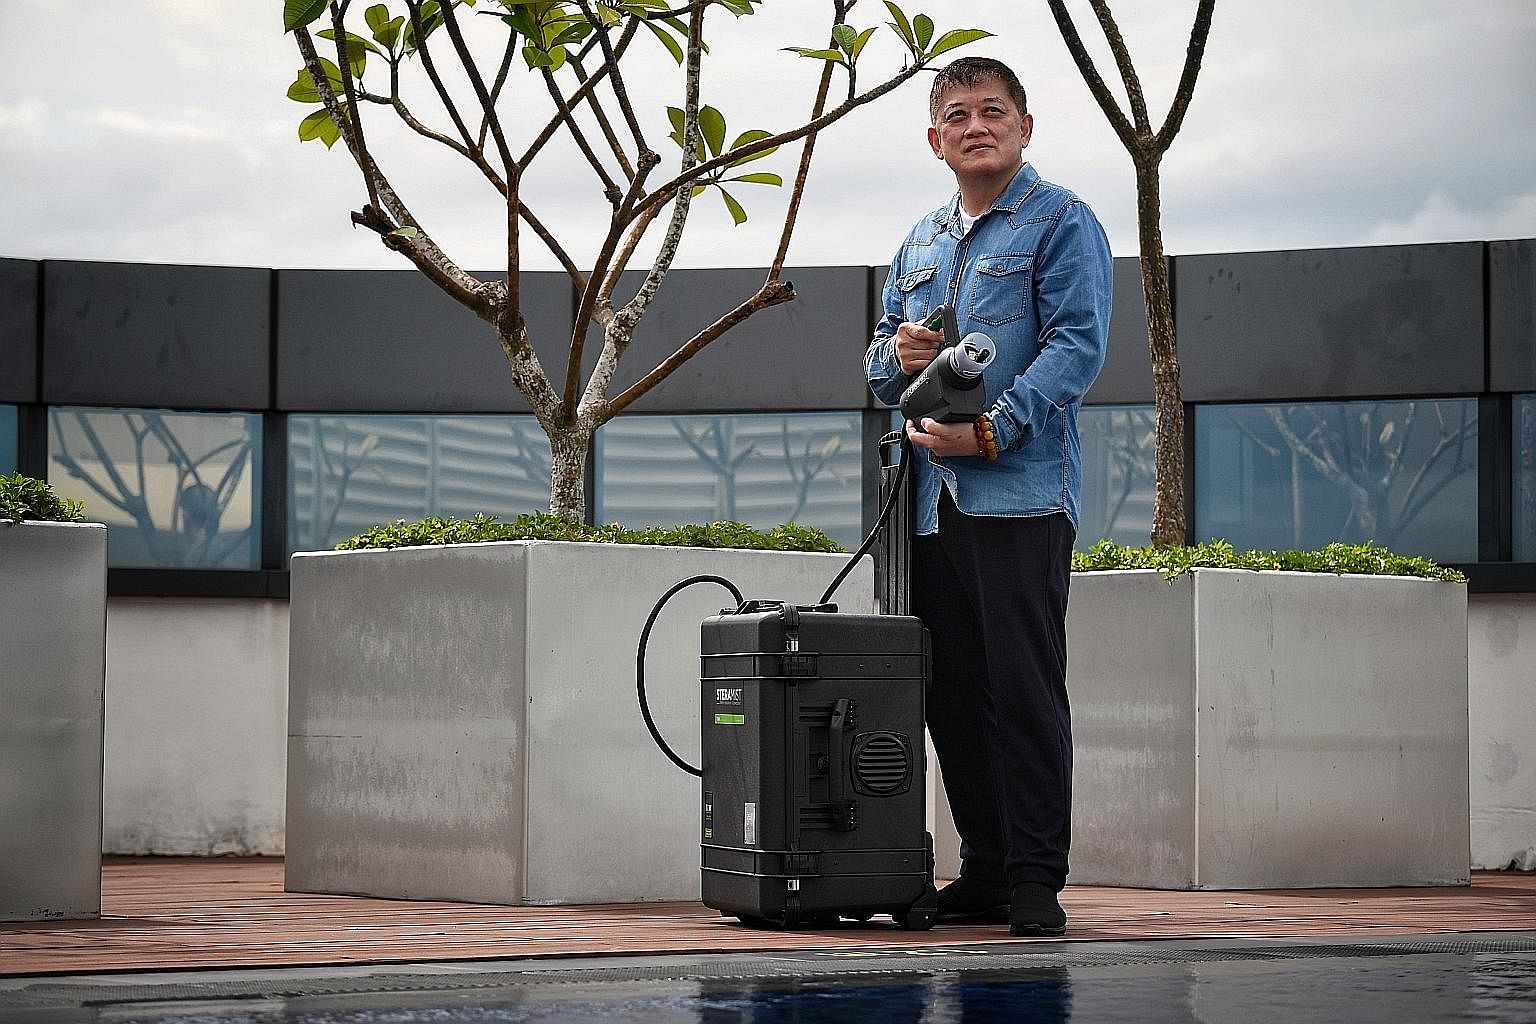 With his Oman projects halted, Mr Nicholas Koh has ventured into new businesses, including marketing the Tomi SteraMist, a decontamination solution from the United States. Ms Reene Ho-Phang and her husband Peter Phang (both above) - who run travel ma